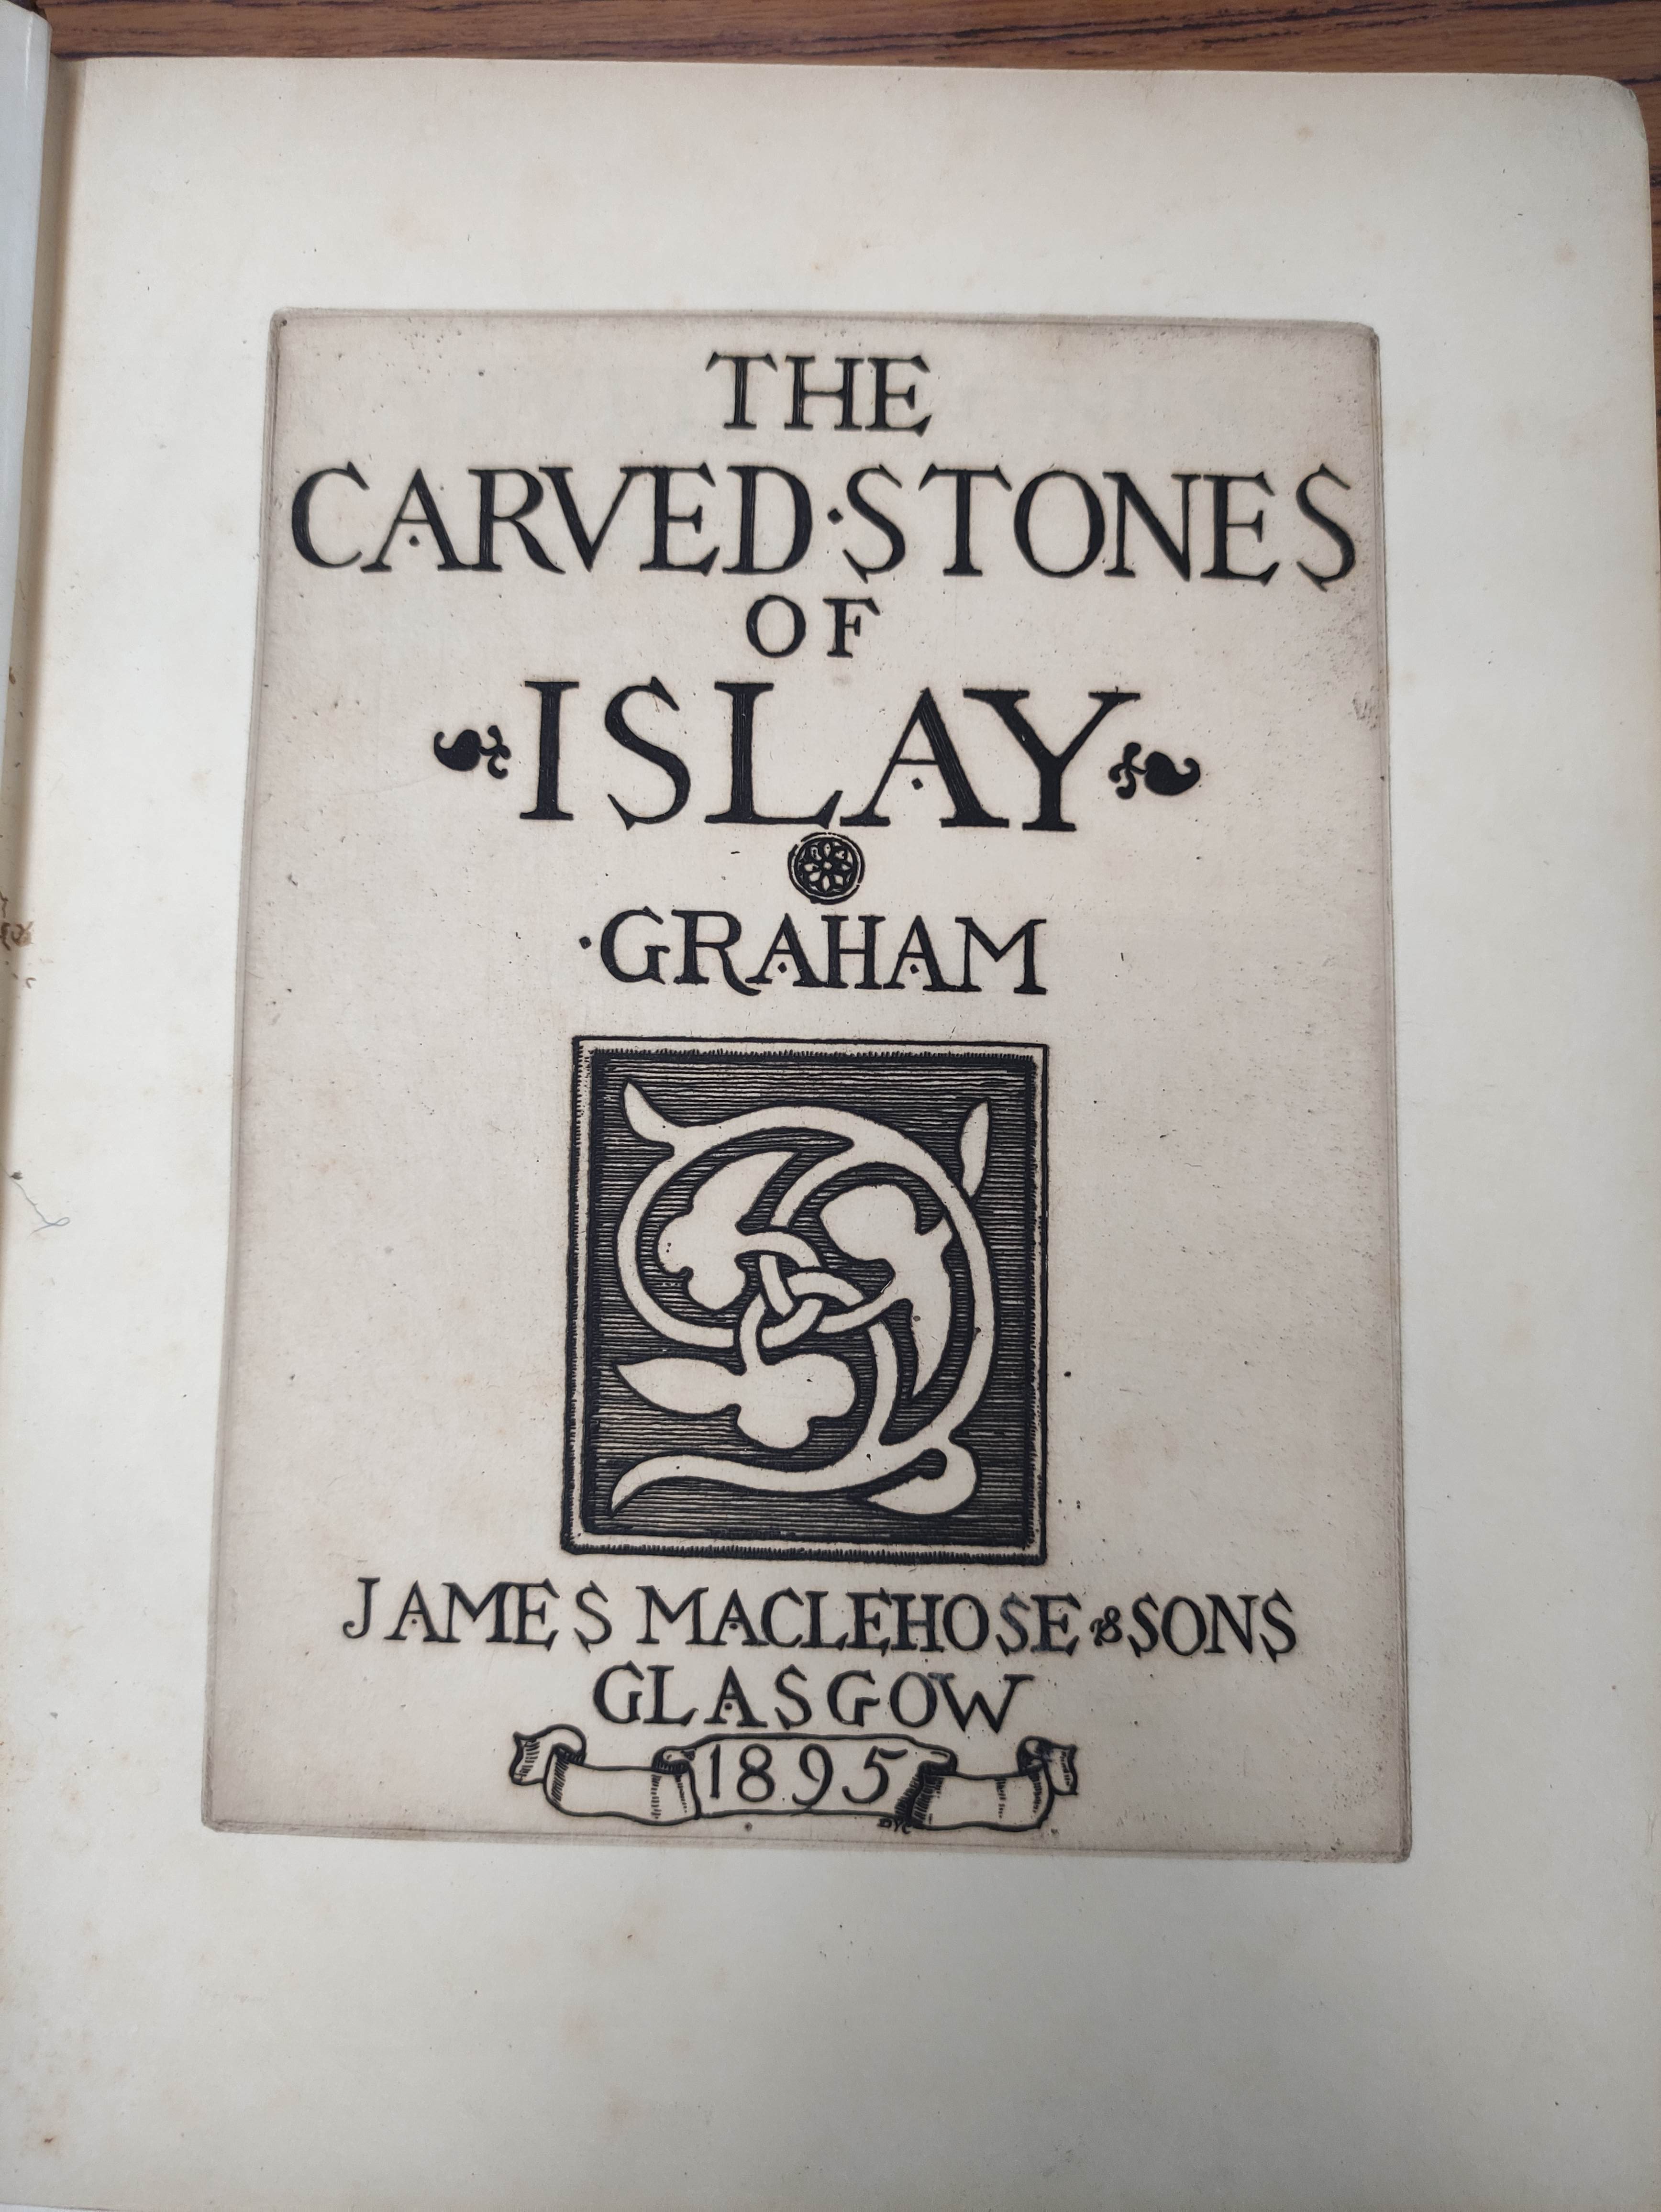 GRAHAM R. C.  The Carved Stones of Islay. Illus. Quarto. Worn orig. qtr. morocco, much internal - Image 4 of 15